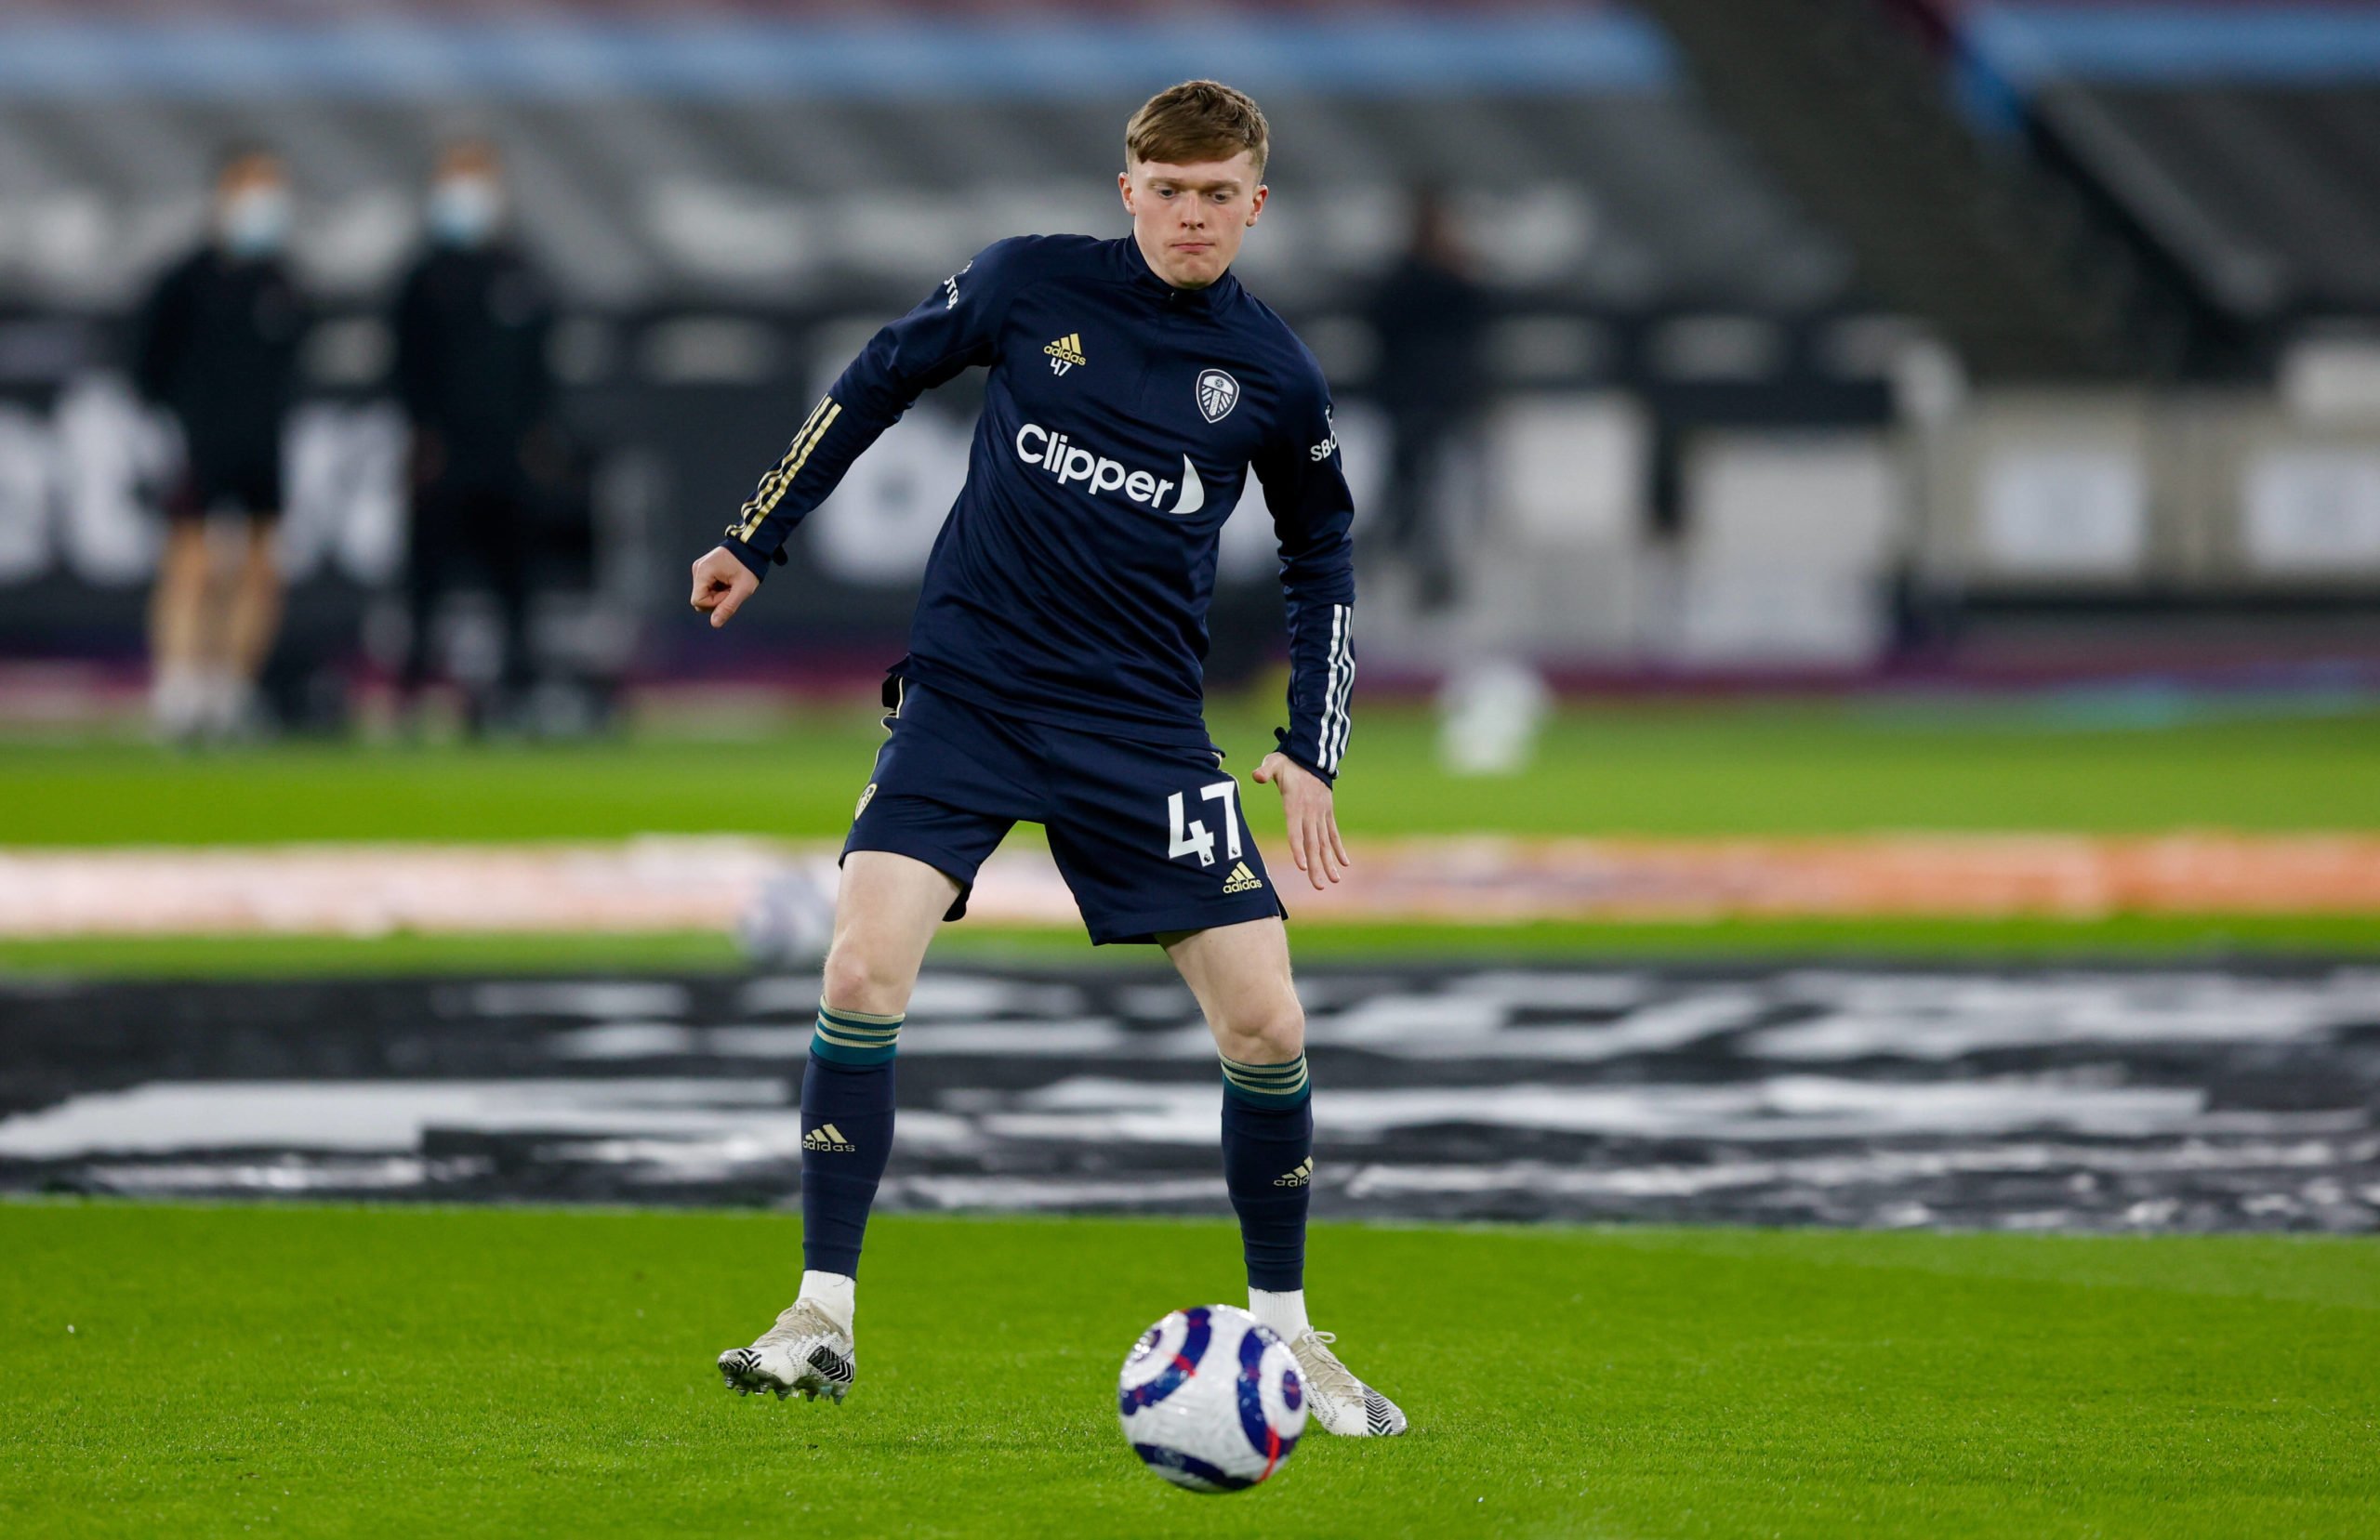 Leeds United have confirmed a new deal for Jack Jenkins - One for the future?